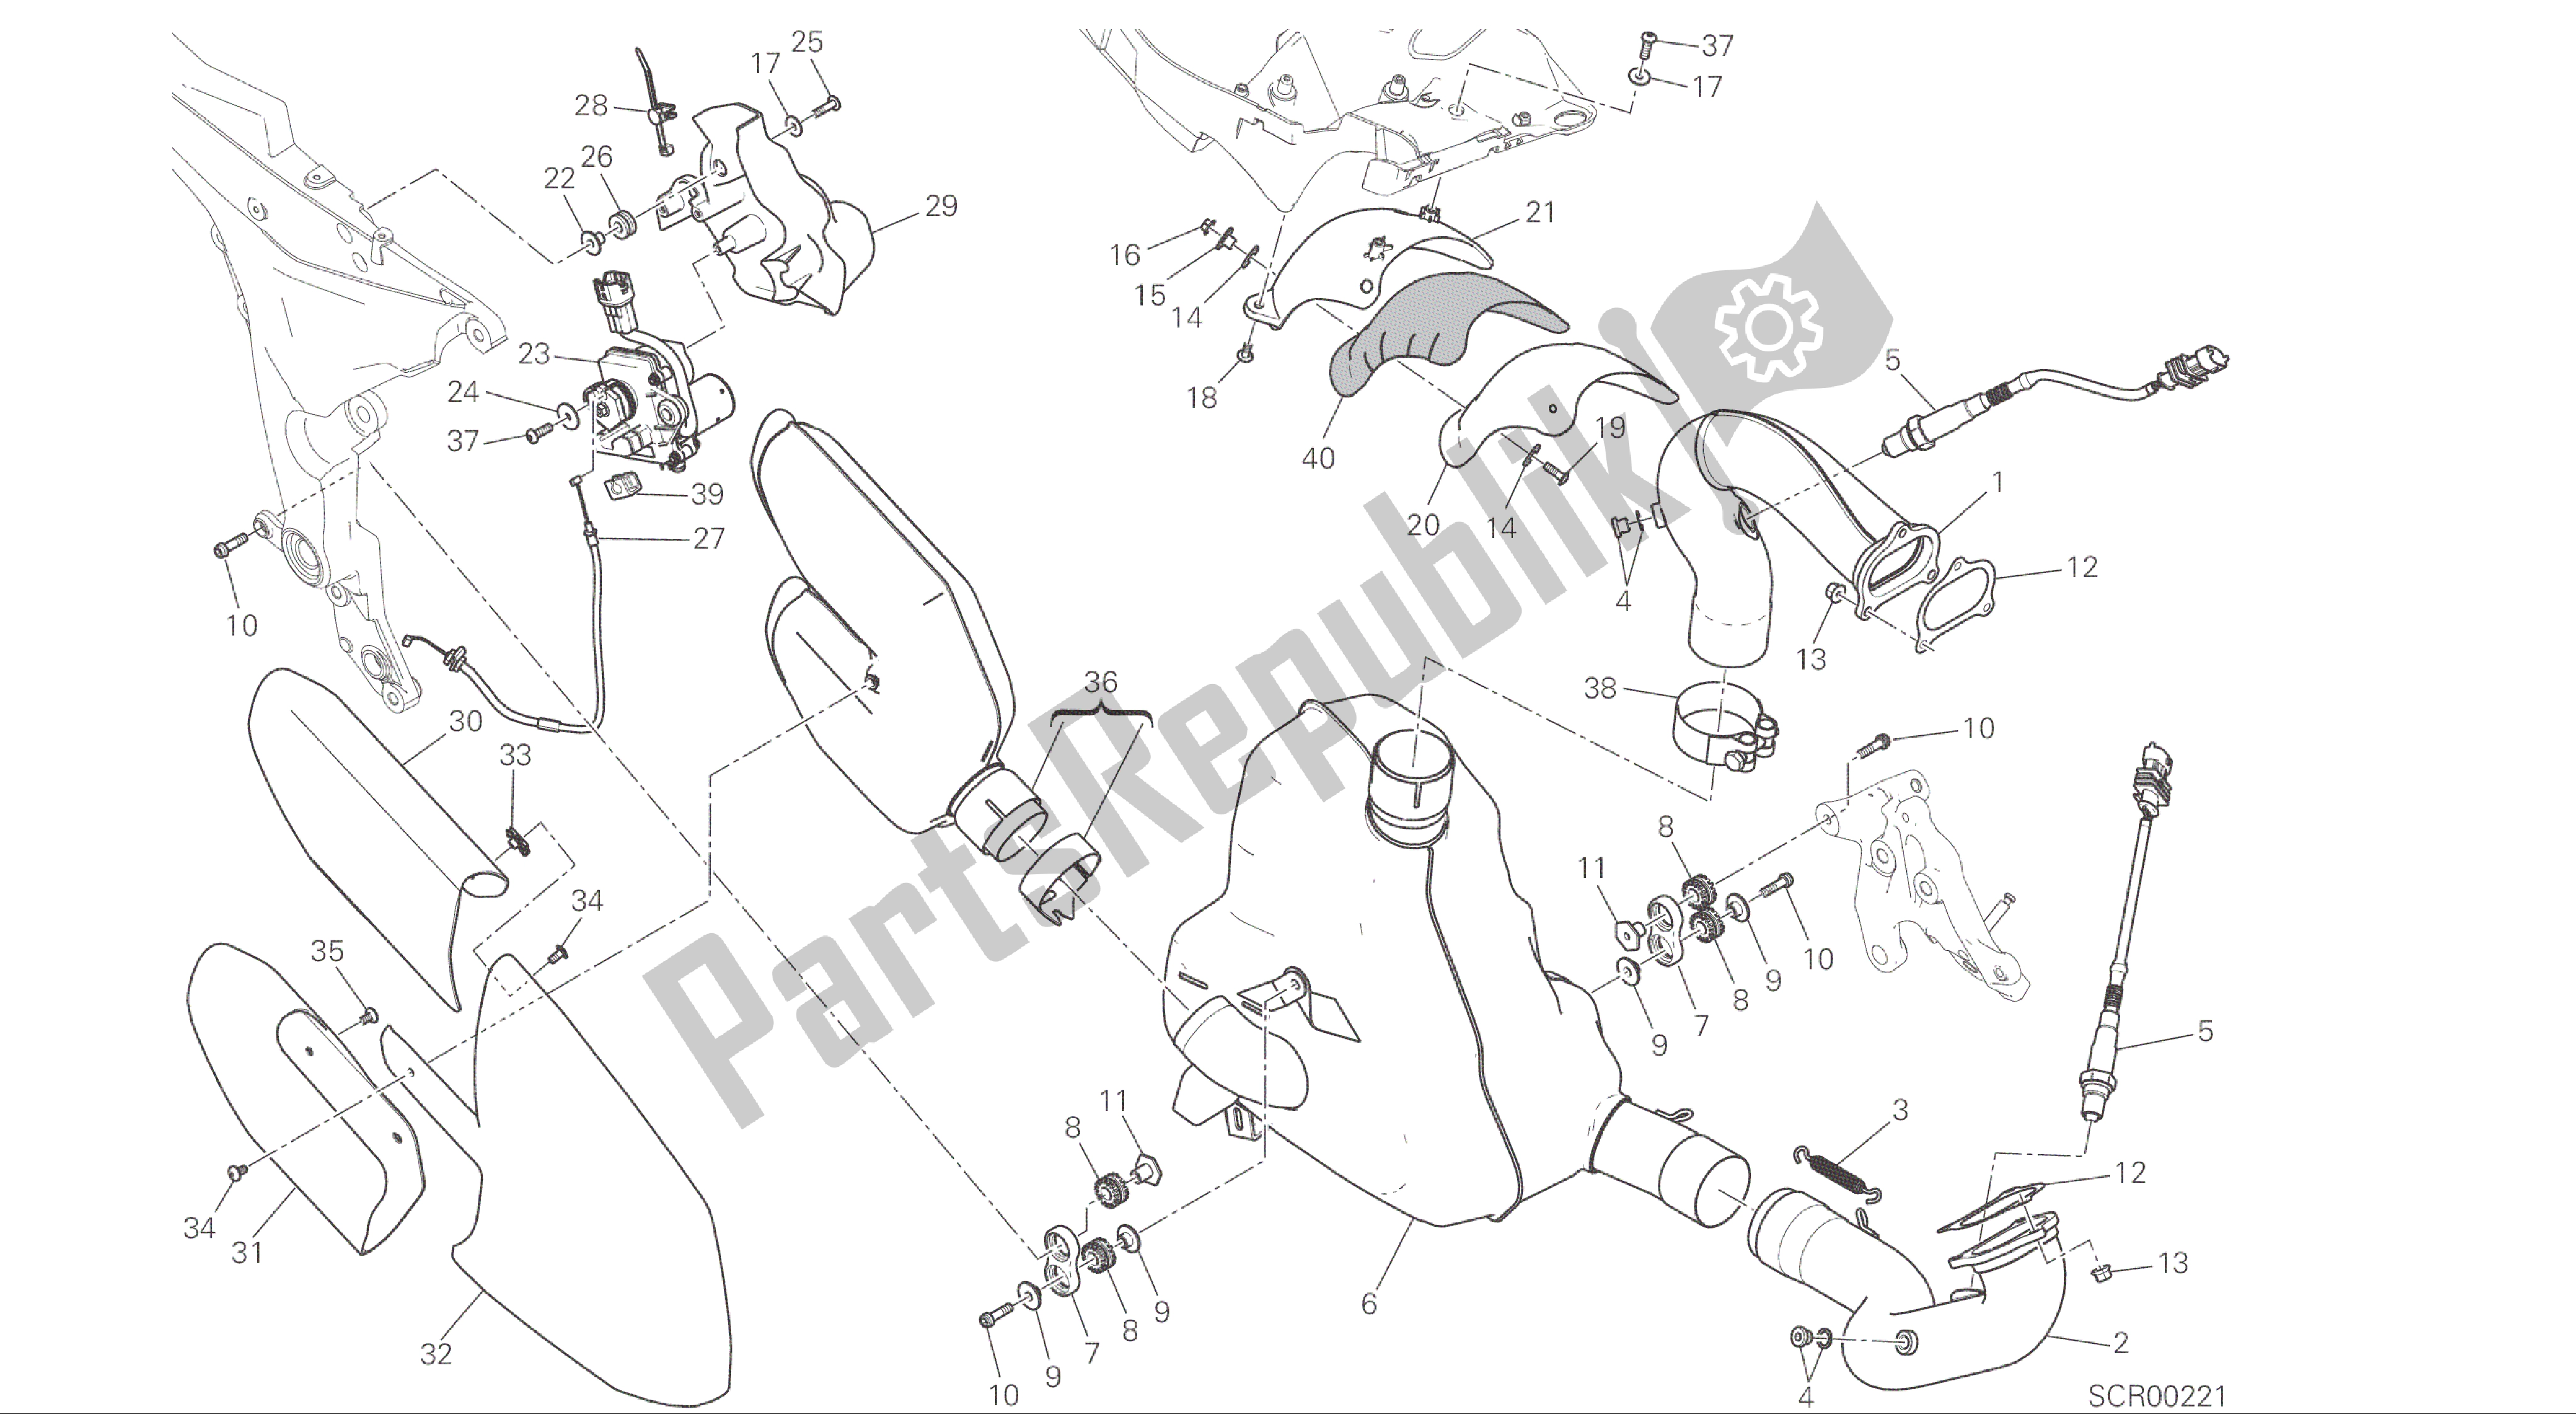 All parts for the Drawing 019 - Exhaust System [mod:ms1200;xst:aus,eur,fra,jap]group Frame of the Ducati Multistrada 1200 2015